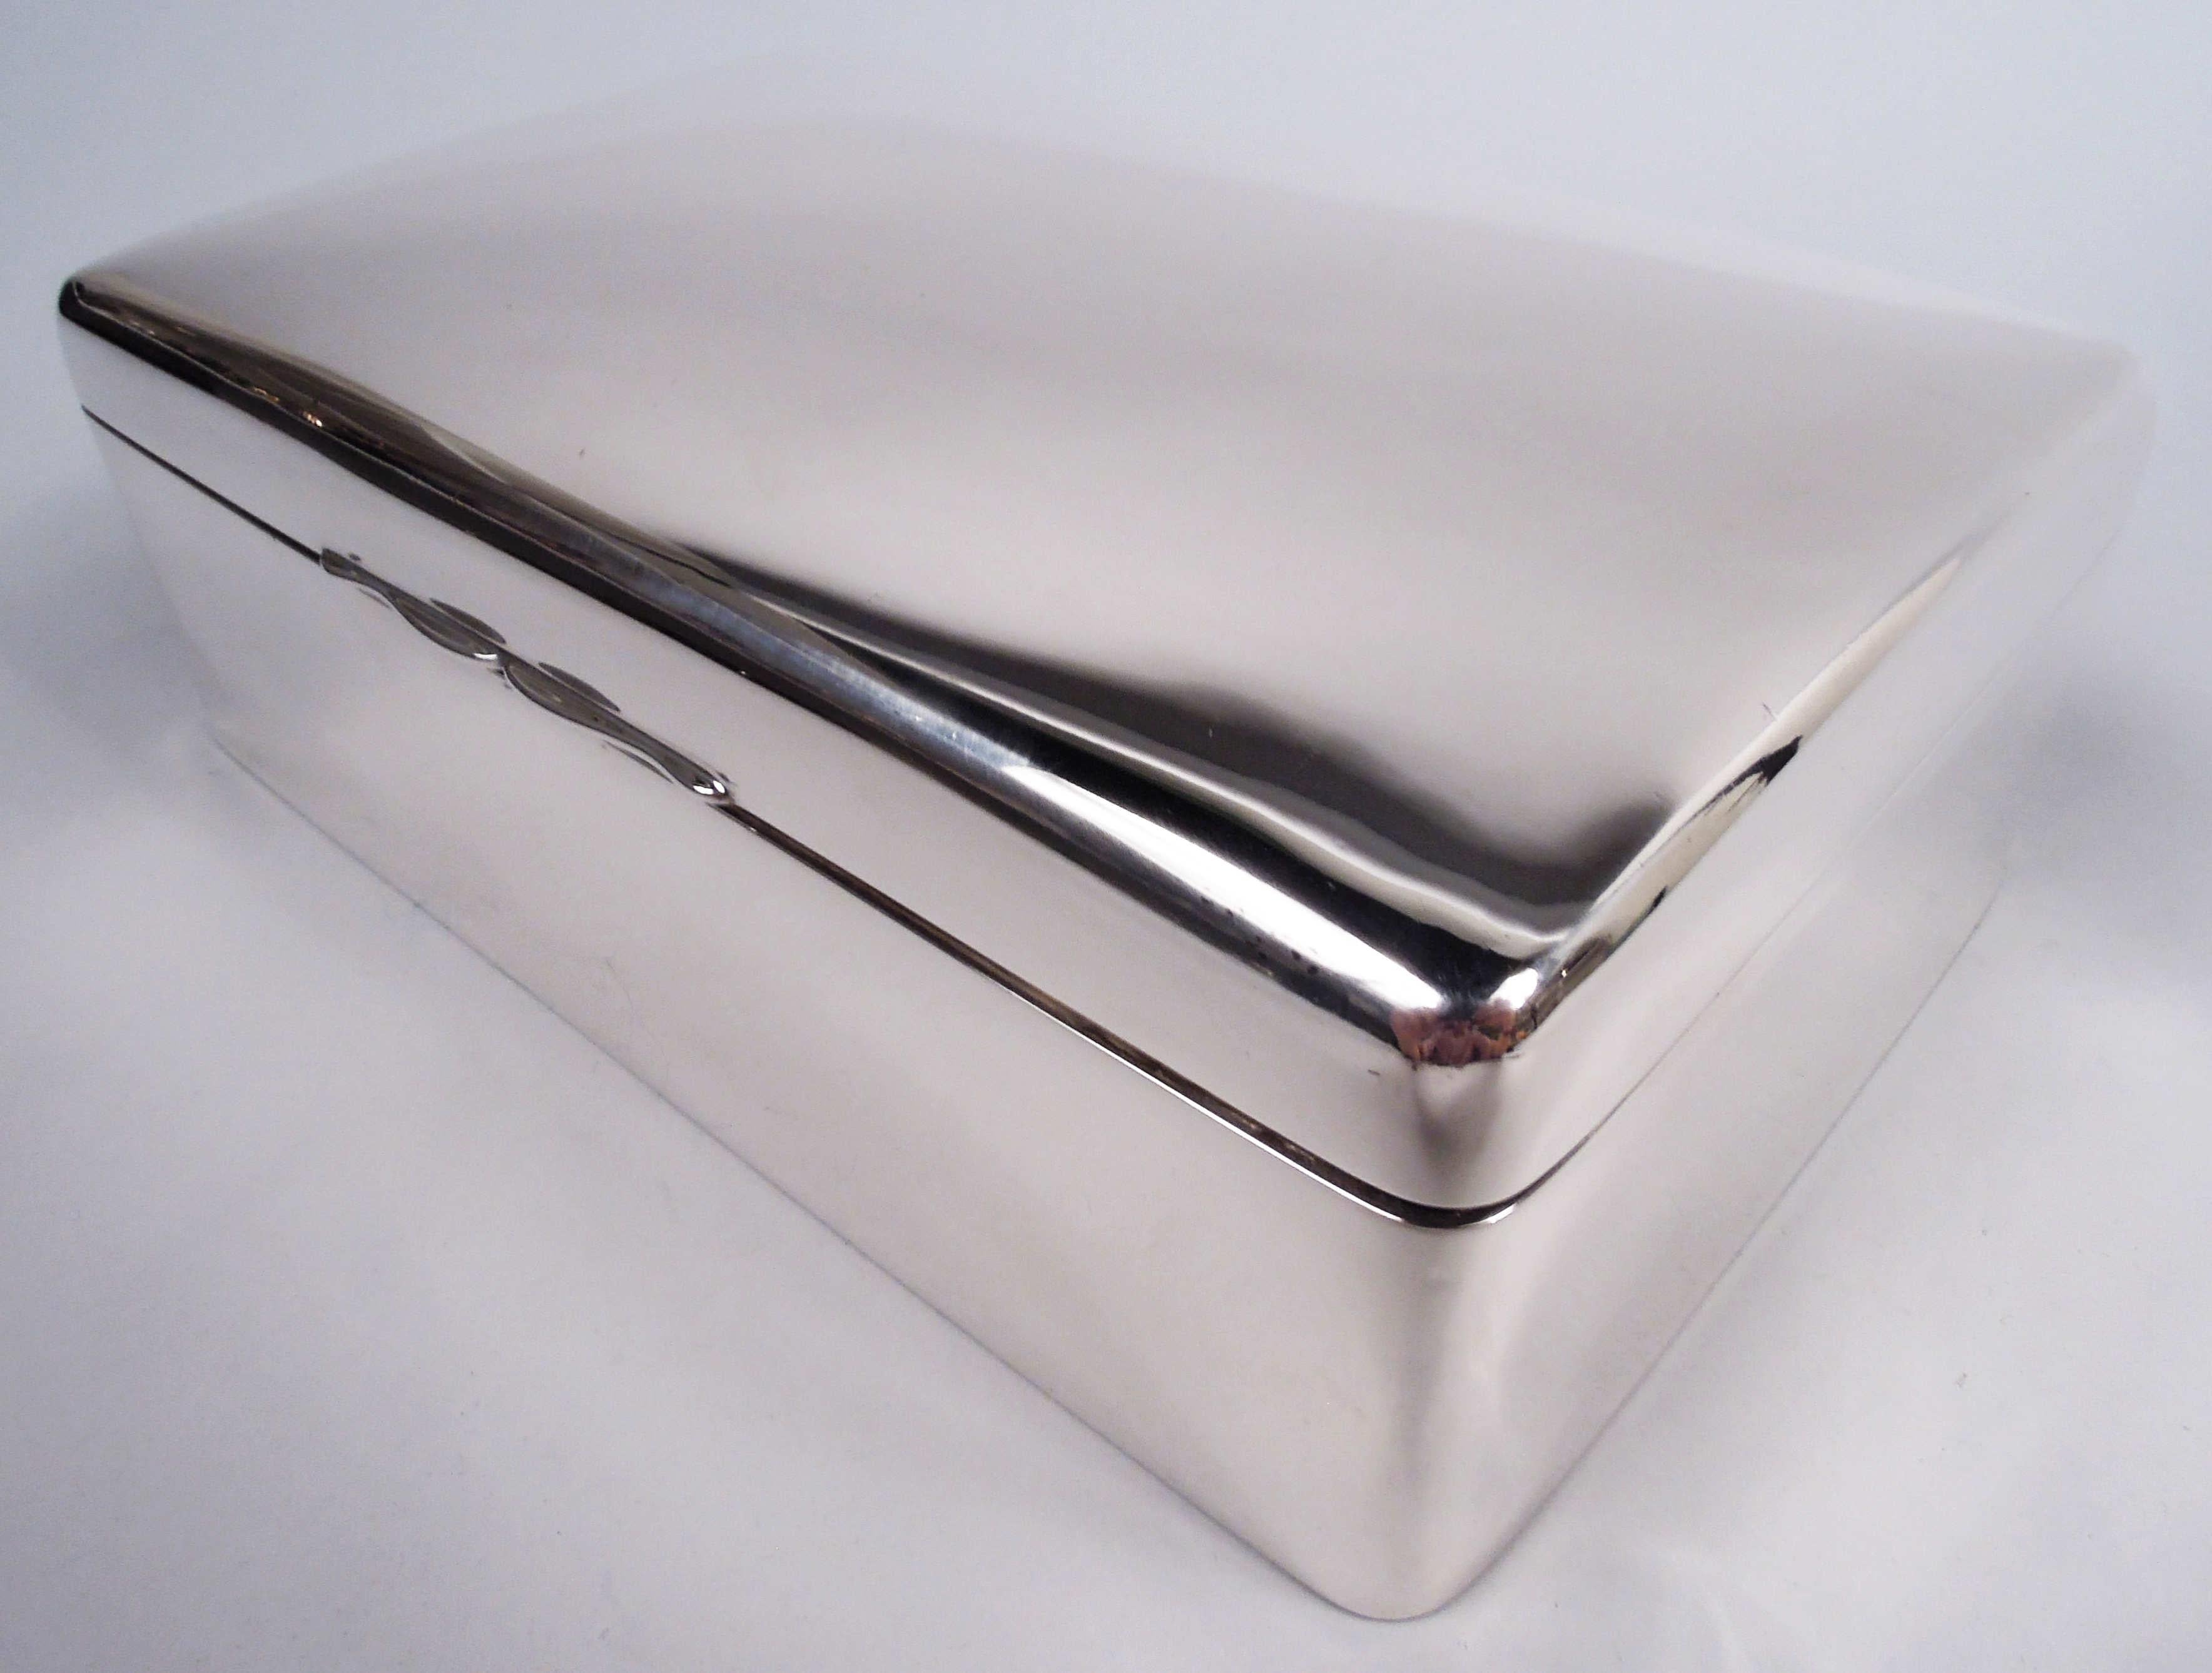 Edwardian Modern sterling silver box. Made by Gorham Manufacturing Co. in Birmingham in 1912. Rectangular with straight sides and curved corners. Cover hinged with curved top and scrolled tab. Box interior cedar-lined and partitioned. Underside felt